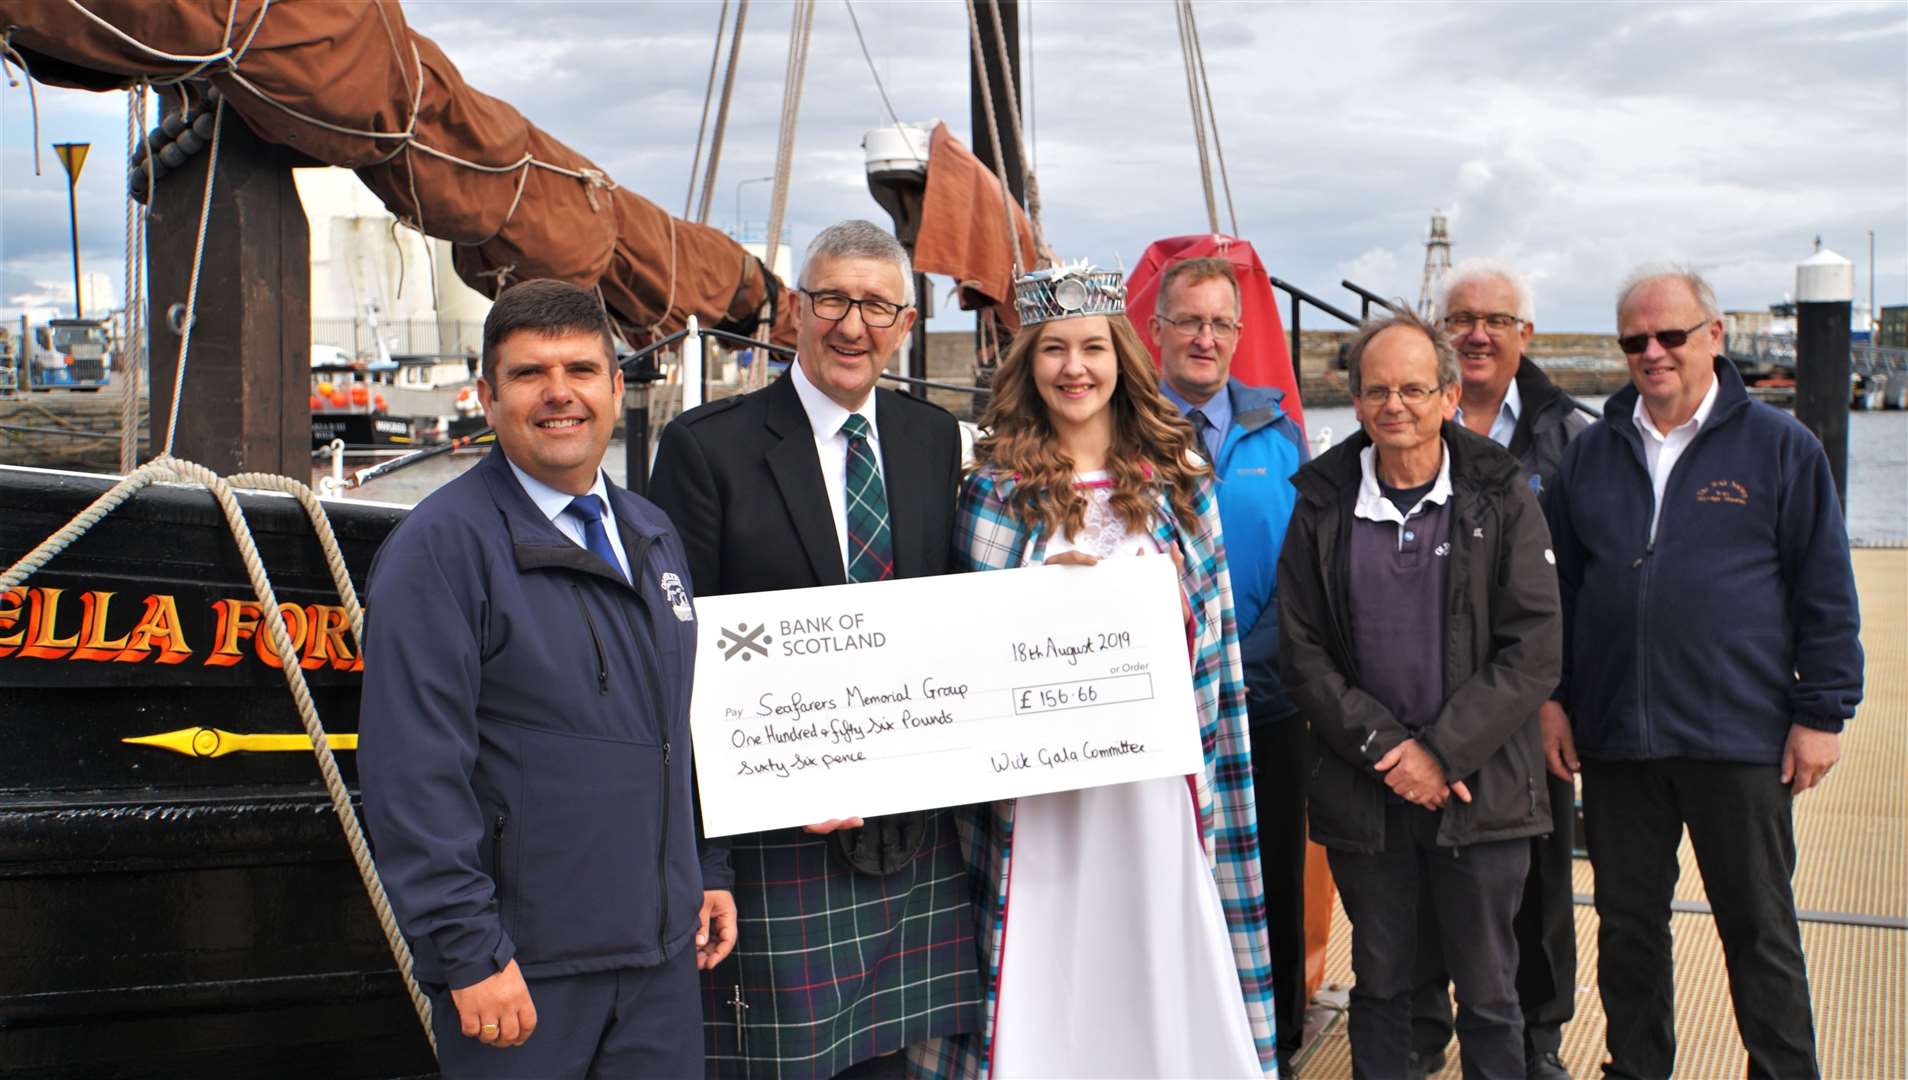 Wick gala queen Maja Pearson hands over a donation from the Wick Gala Committee of over £150 to Willie Watt for the Seafarers Memorial Group. Money raised by the group will go towards the creation of a permanent sculpture. Picture: David G Scott